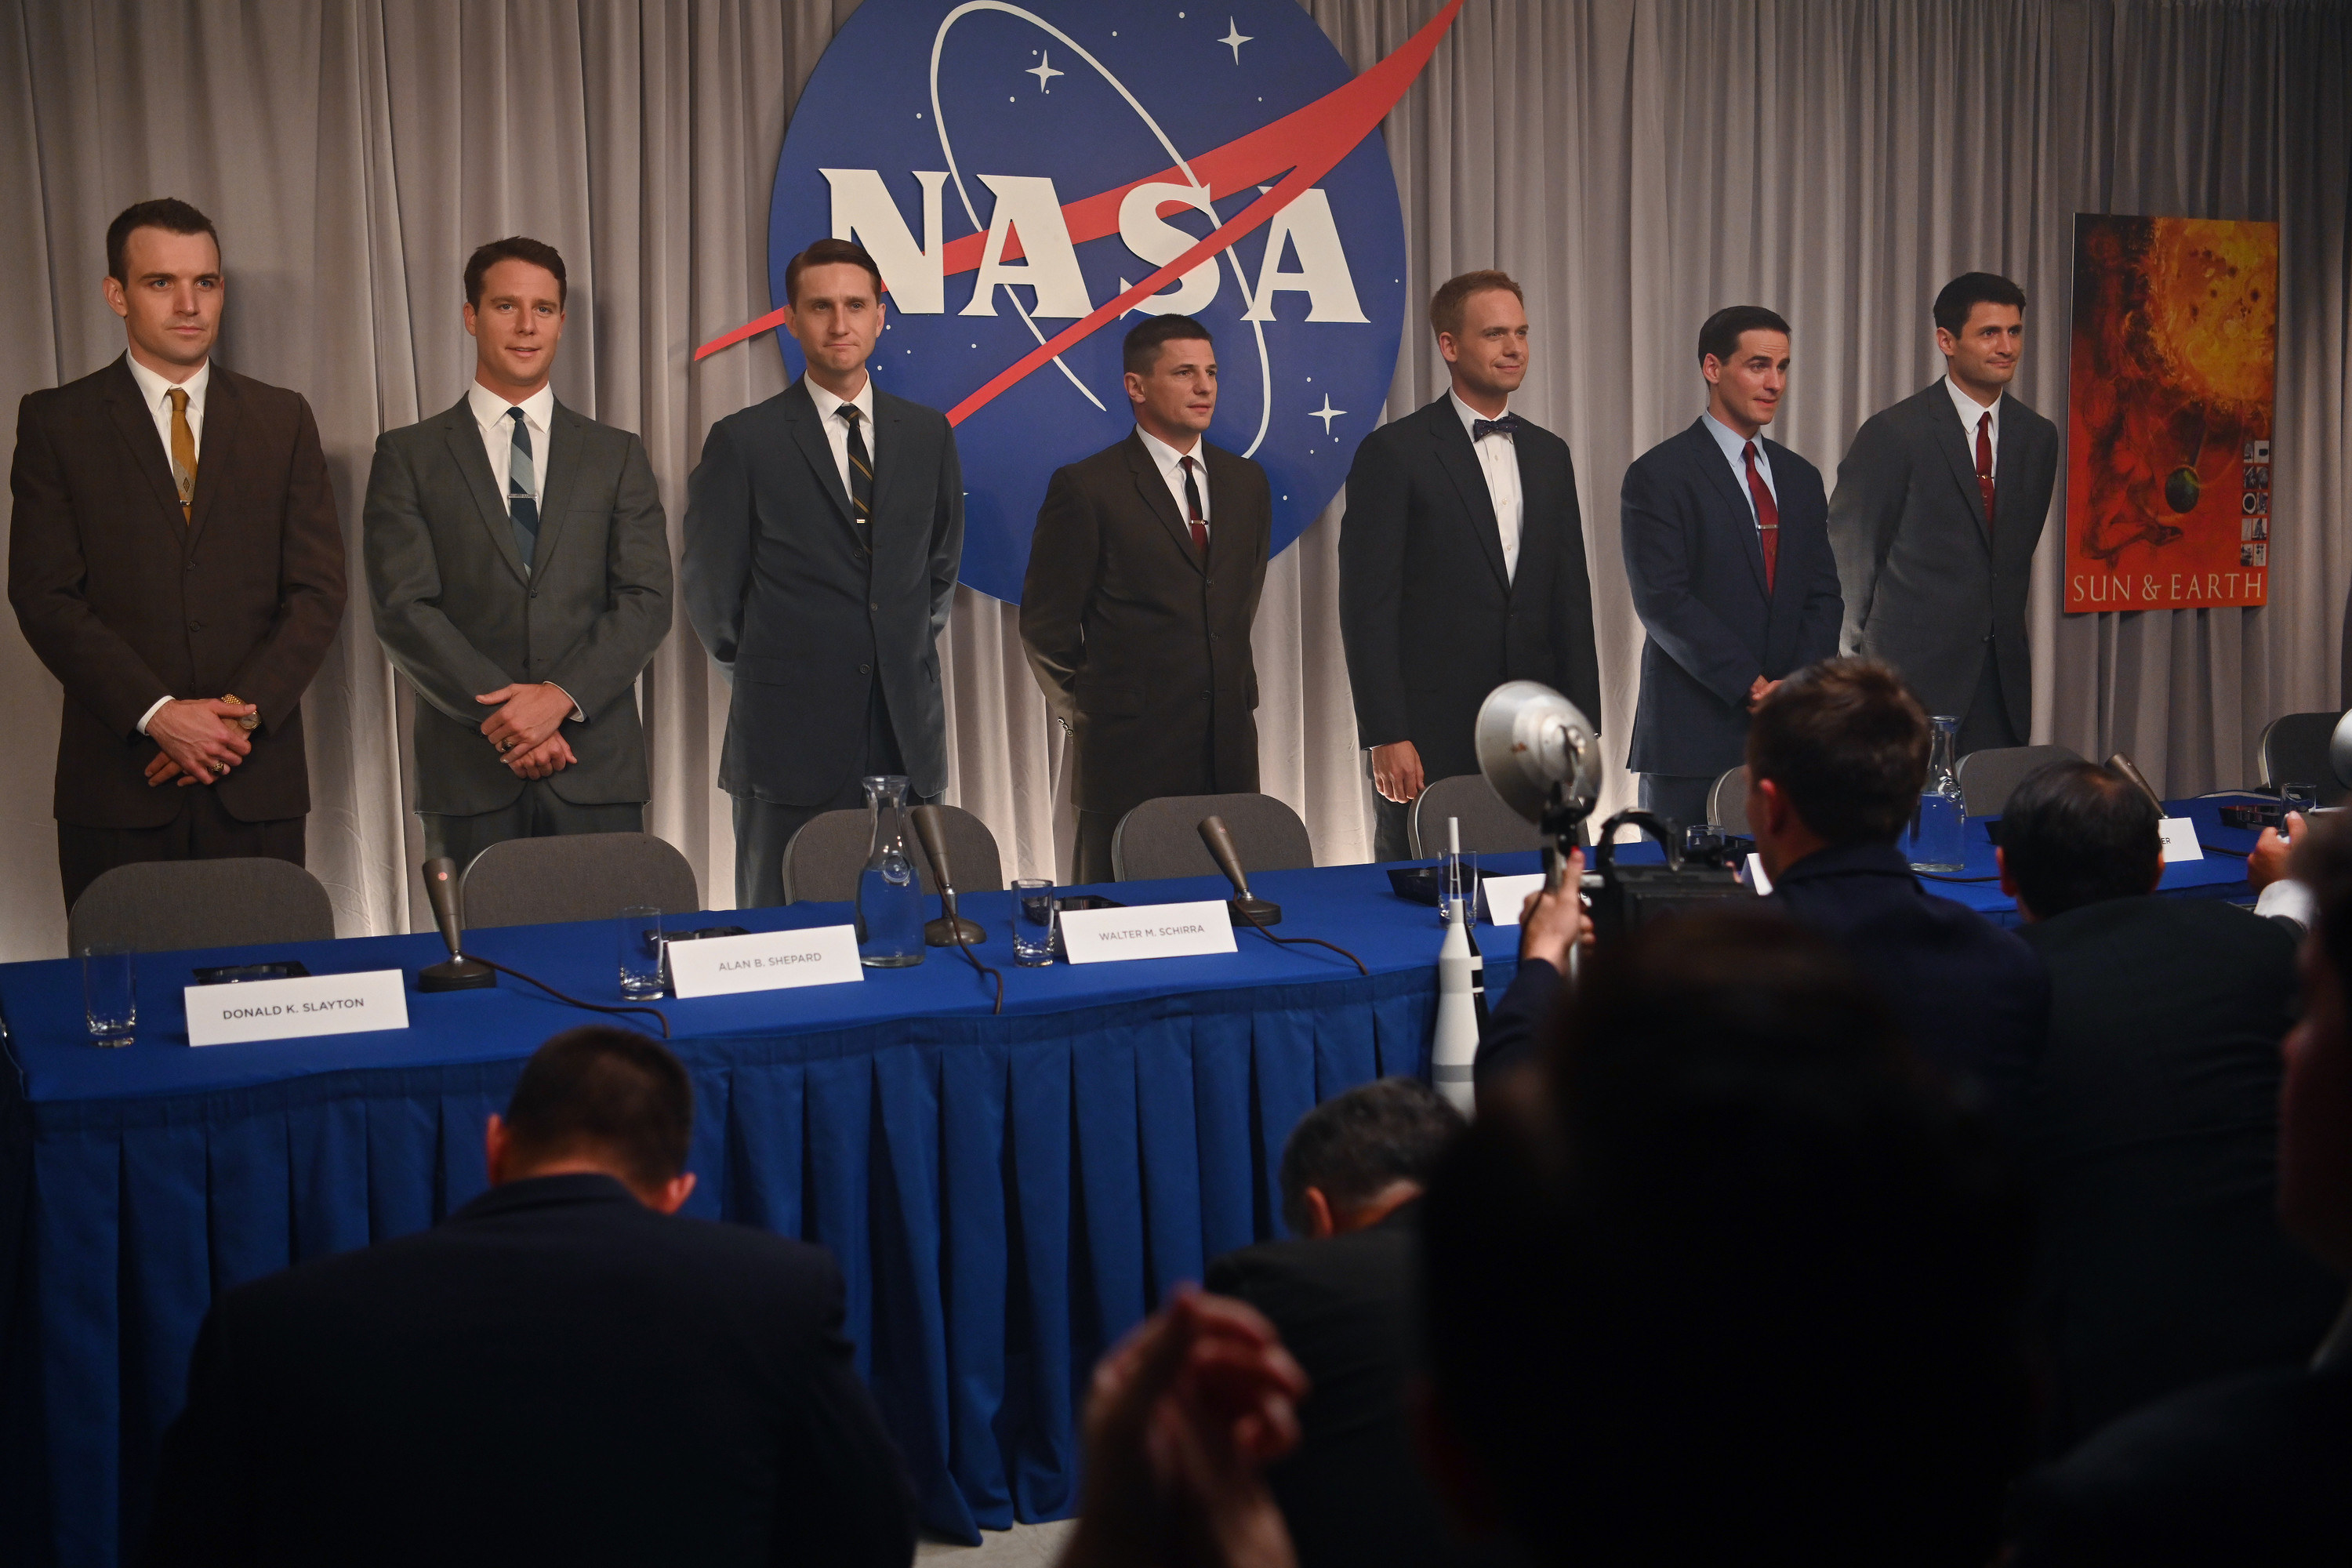 The cast of The Right Stuff stand behind a Nasa press conference table